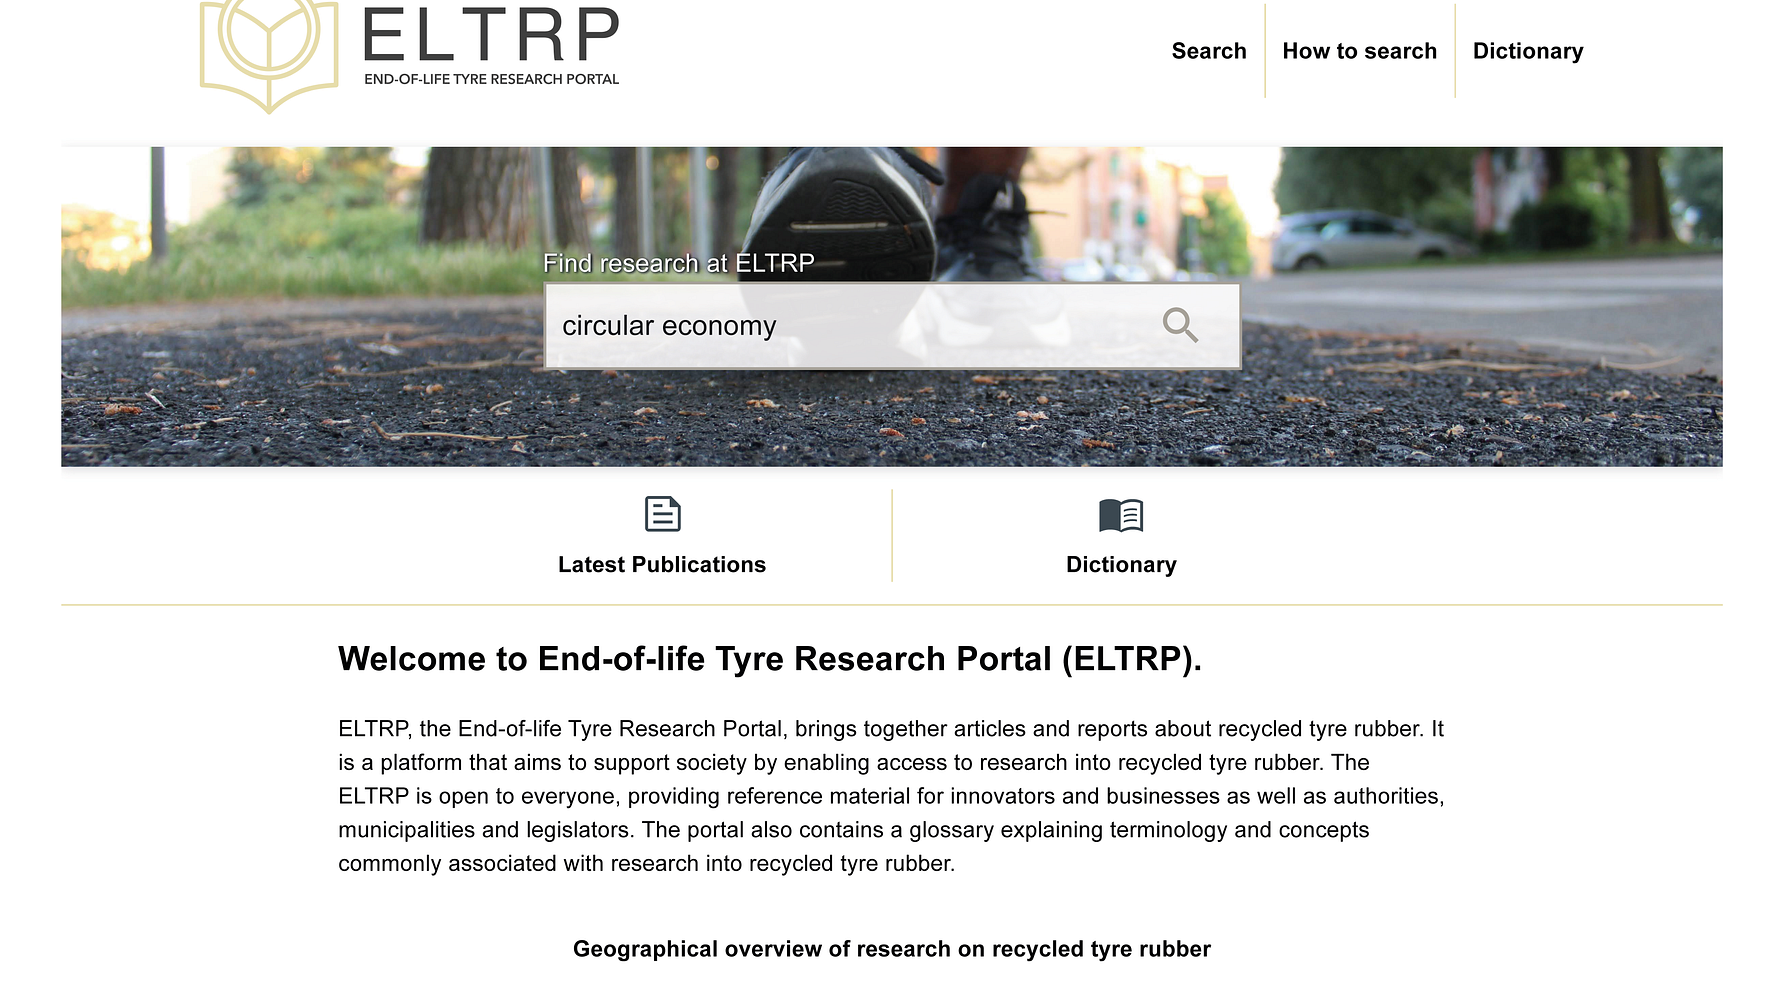 The world’s first research portal for recycled tyre rubber